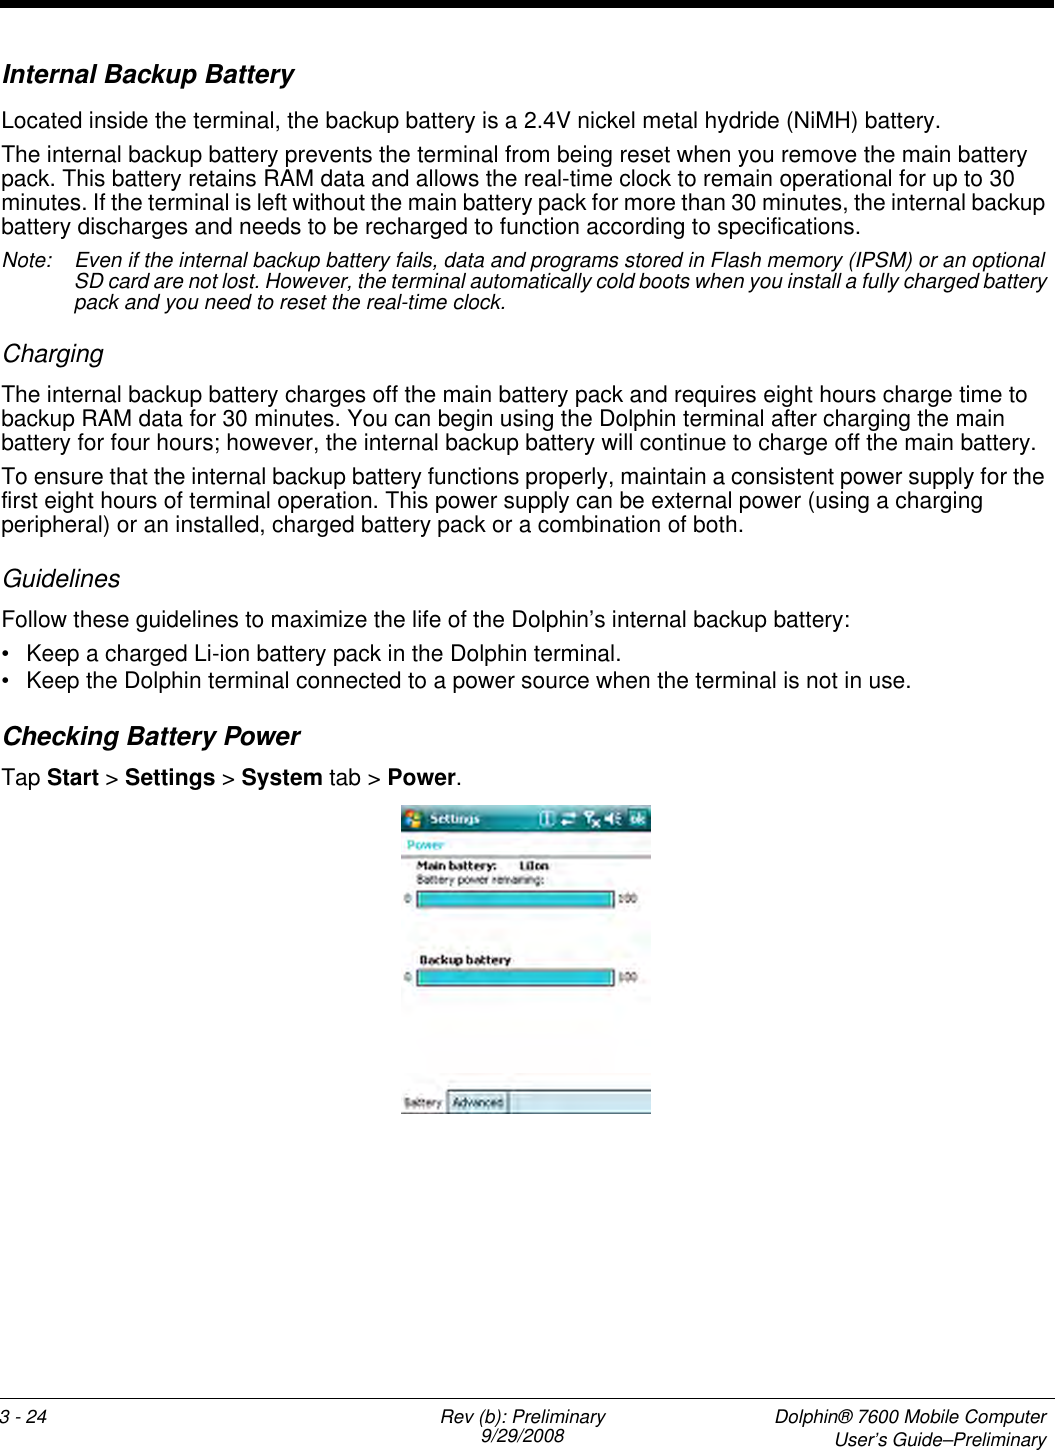 3 - 24 Rev (b): Preliminary9/29/2008  Dolphin® 7600 Mobile ComputerUser’s Guide–PreliminaryInternal Backup BatteryLocated inside the terminal, the backup battery is a 2.4V nickel metal hydride (NiMH) battery.The internal backup battery prevents the terminal from being reset when you remove the main battery pack. This battery retains RAM data and allows the real-time clock to remain operational for up to 30 minutes. If the terminal is left without the main battery pack for more than 30 minutes, the internal backup battery discharges and needs to be recharged to function according to specifications. Note: Even if the internal backup battery fails, data and programs stored in Flash memory (IPSM) or an optional SD card are not lost. However, the terminal automatically cold boots when you install a fully charged battery pack and you need to reset the real-time clock.ChargingThe internal backup battery charges off the main battery pack and requires eight hours charge time to backup RAM data for 30 minutes. You can begin using the Dolphin terminal after charging the main battery for four hours; however, the internal backup battery will continue to charge off the main battery. To ensure that the internal backup battery functions properly, maintain a consistent power supply for the first eight hours of terminal operation. This power supply can be external power (using a charging peripheral) or an installed, charged battery pack or a combination of both.Guidelines Follow these guidelines to maximize the life of the Dolphin’s internal backup battery:• Keep a charged Li-ion battery pack in the Dolphin terminal. • Keep the Dolphin terminal connected to a power source when the terminal is not in use. Checking Battery PowerTap Start &gt; Settings &gt; System tab &gt; Power. 